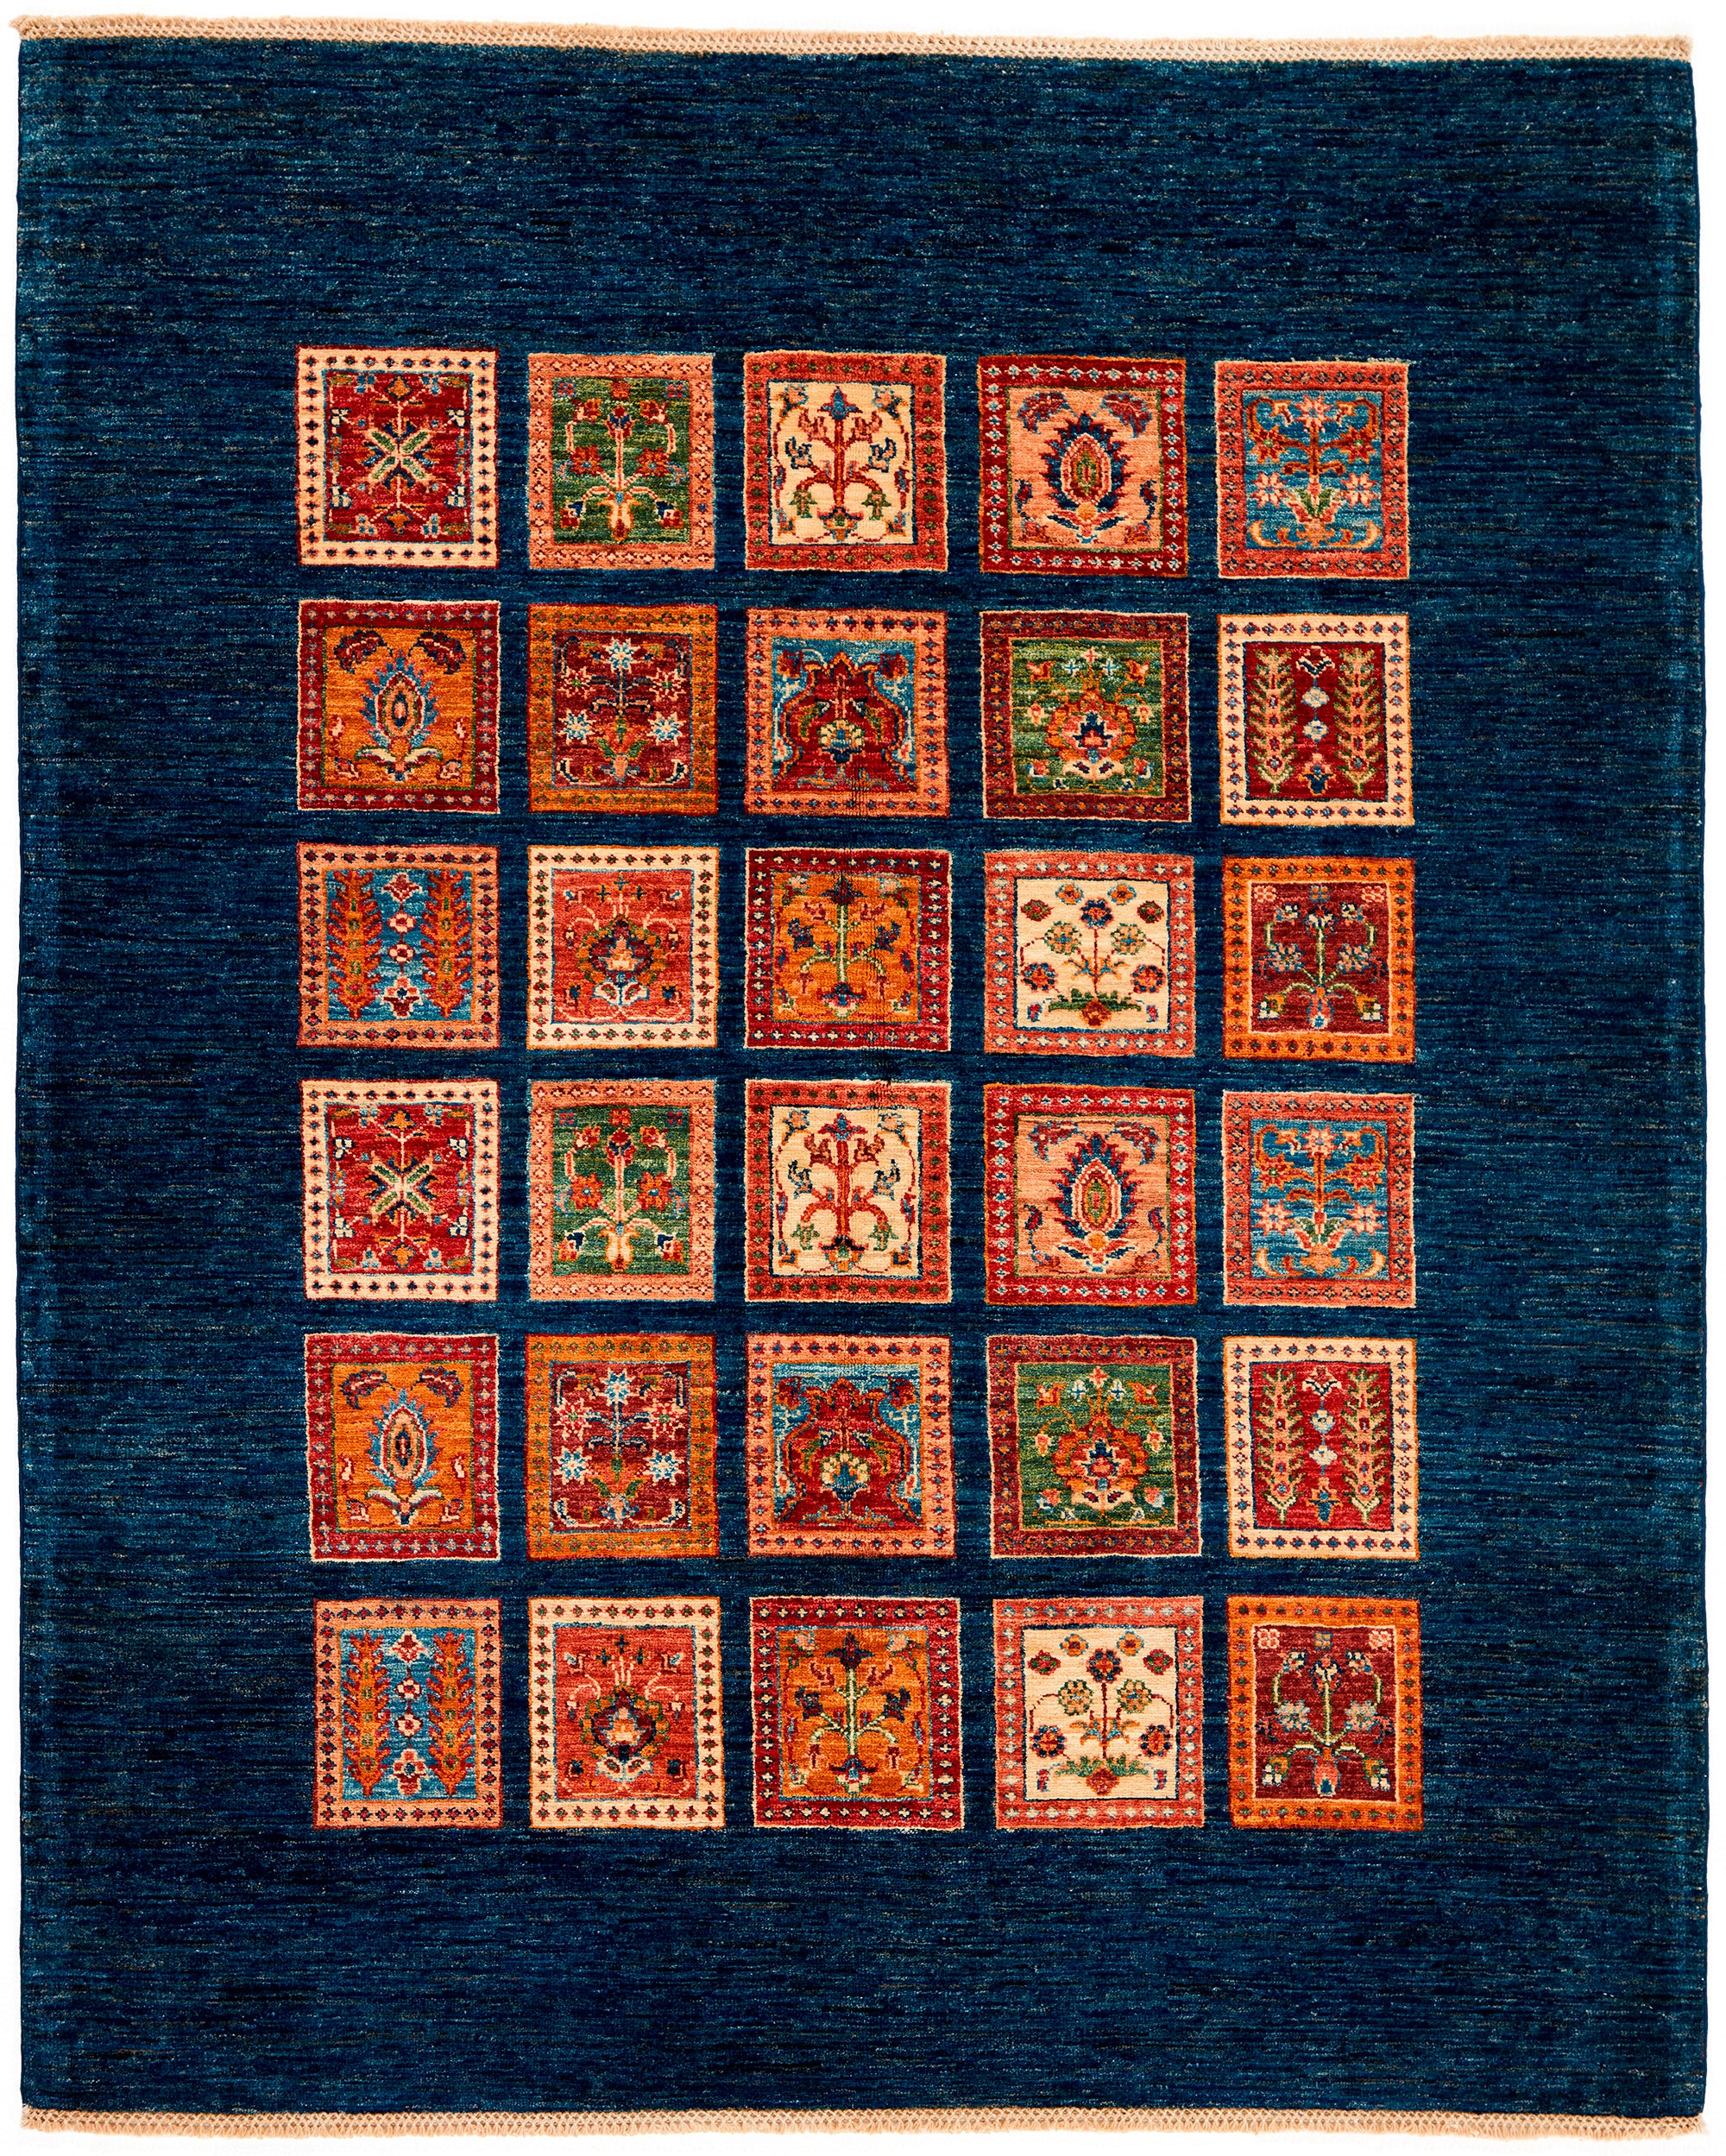 Authentic oriental rug with traditional tile pattern in red, yellow, blue, green, beige and brown